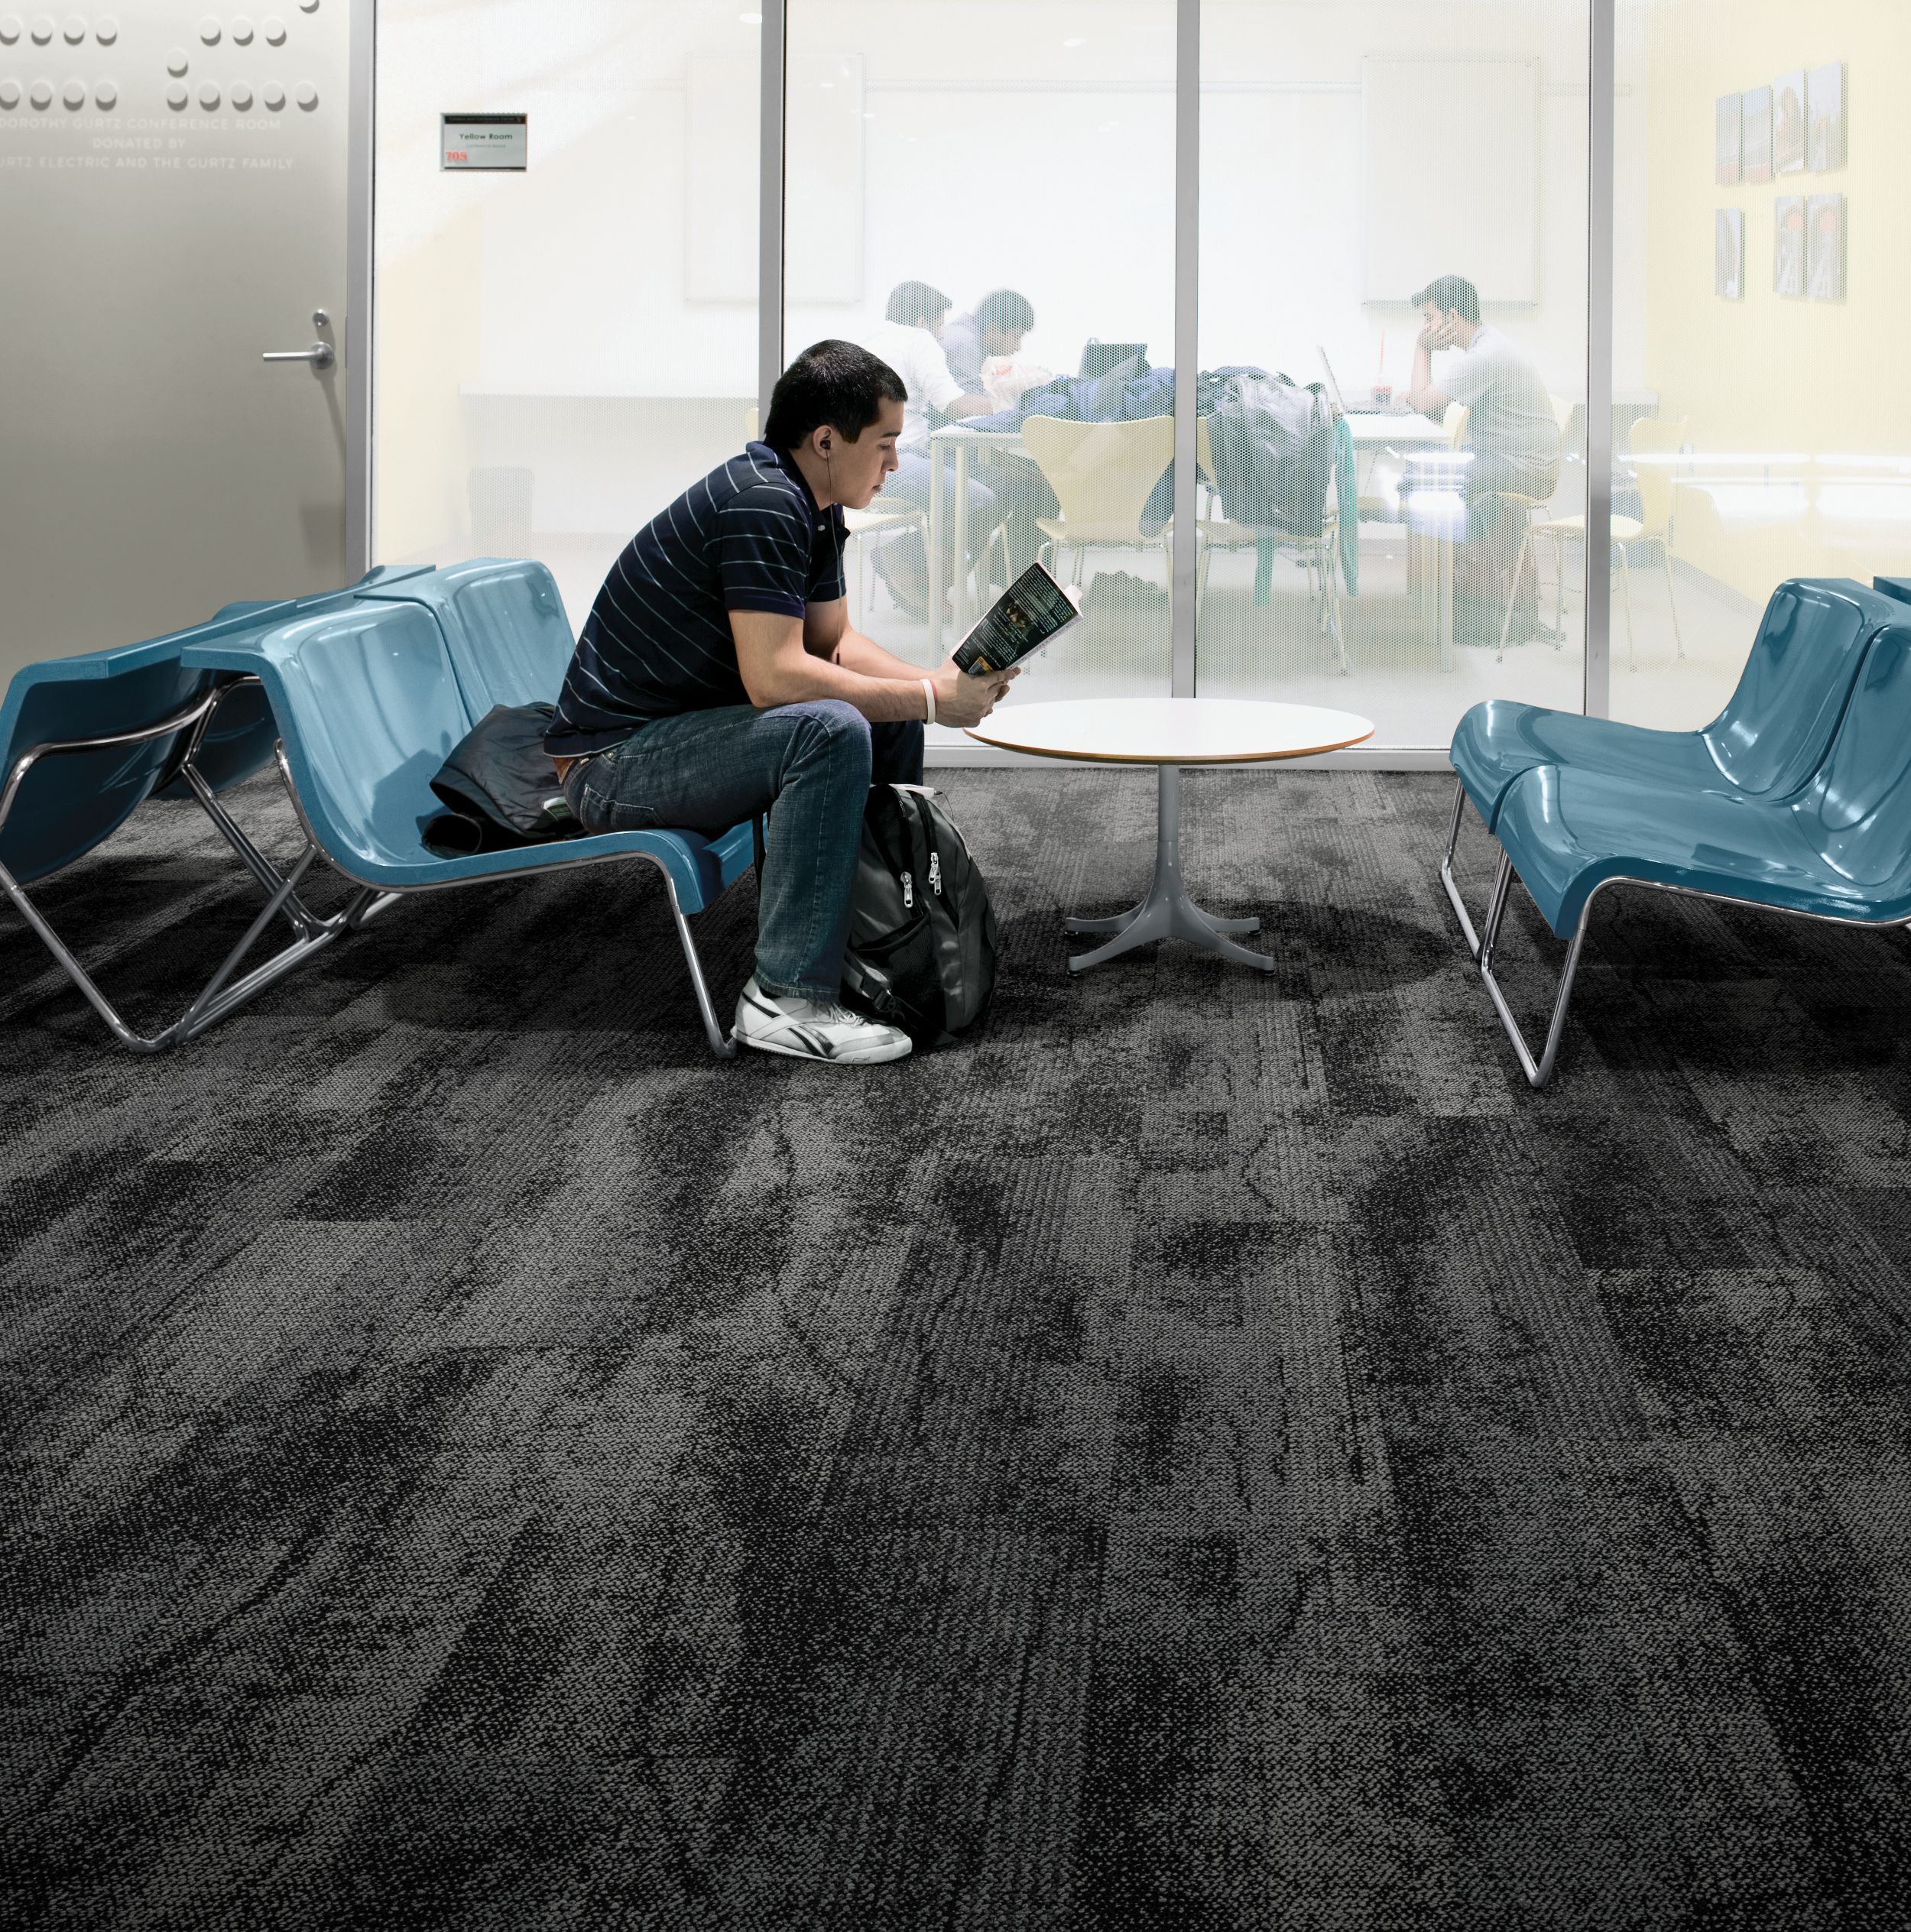 Interface Neighborhood Smooth plank carpet tile in public education space with man reading a book on blue chair image number 2